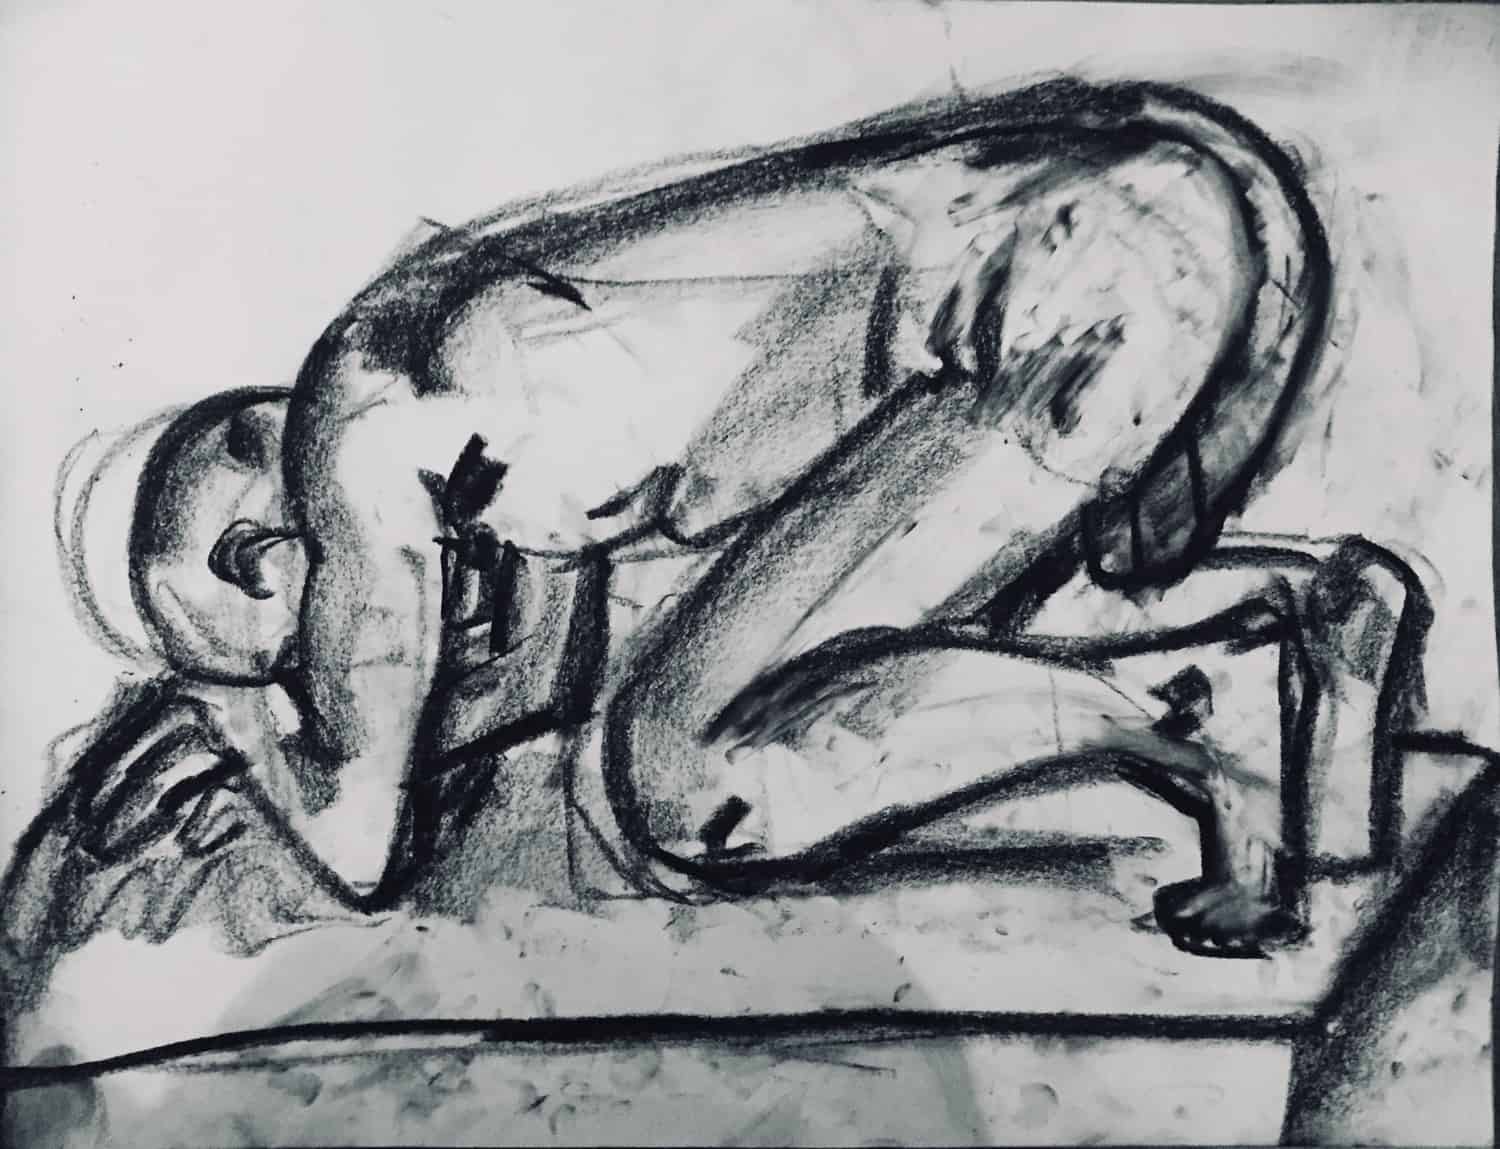 Man on All Fours, Figure Drawings